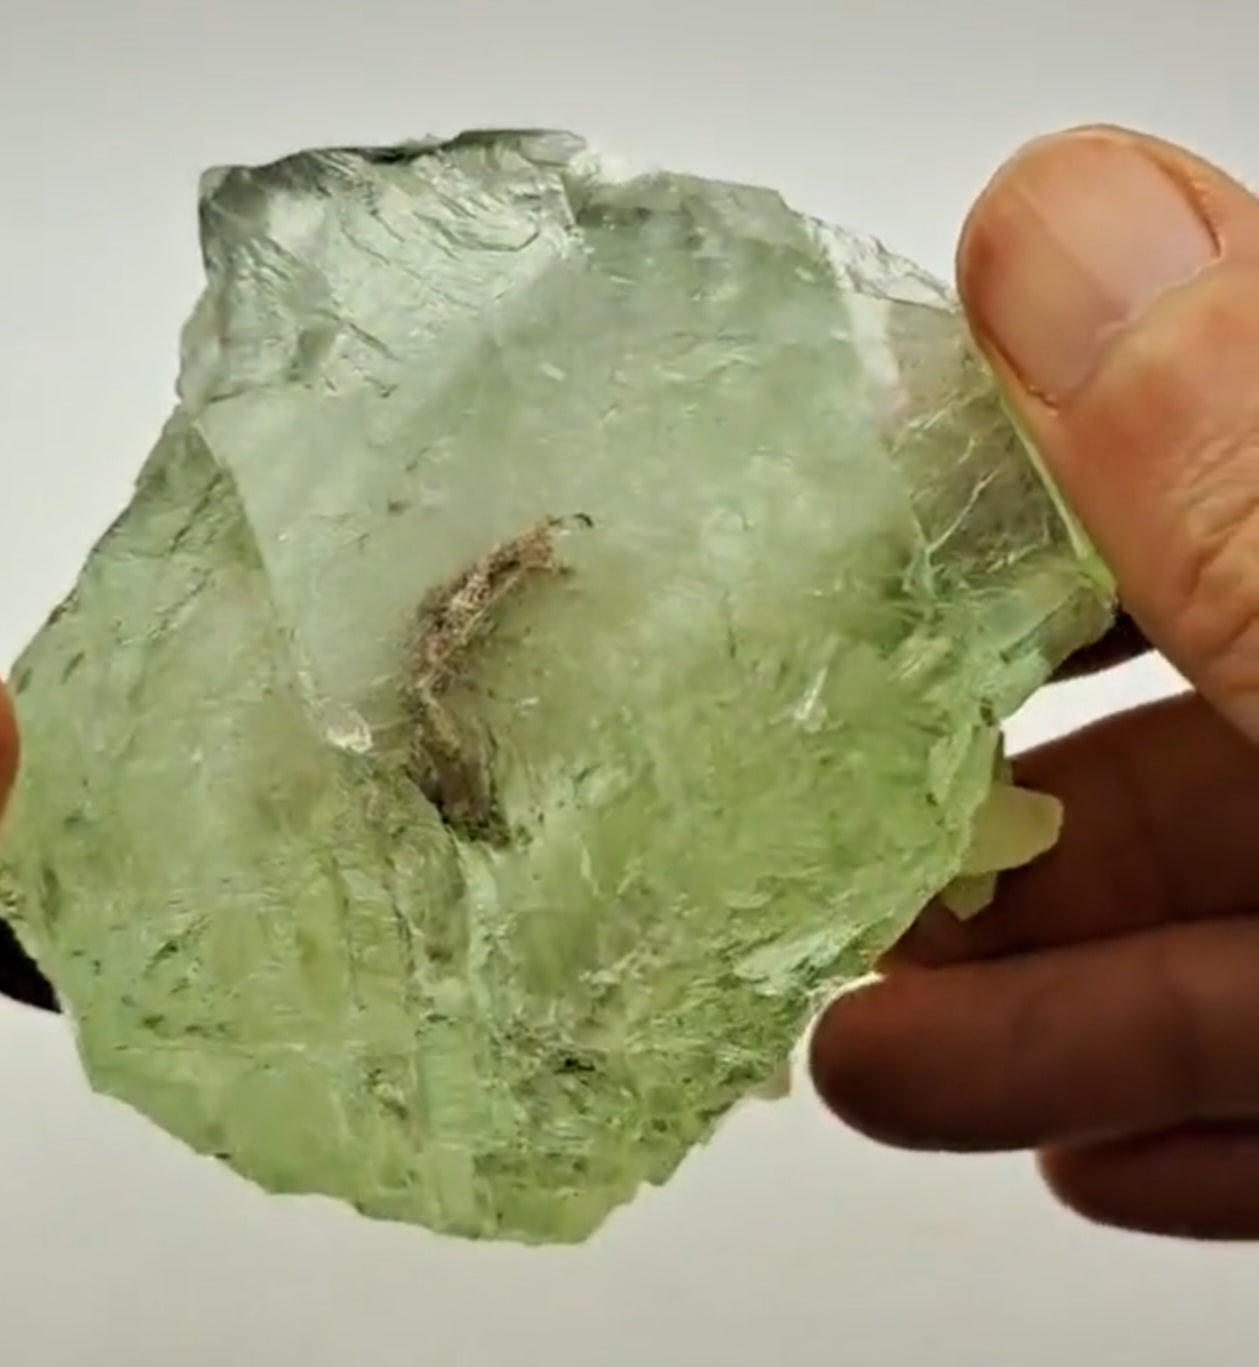 Lime Green Fluorite with Calcite - Spectacular Specimen!